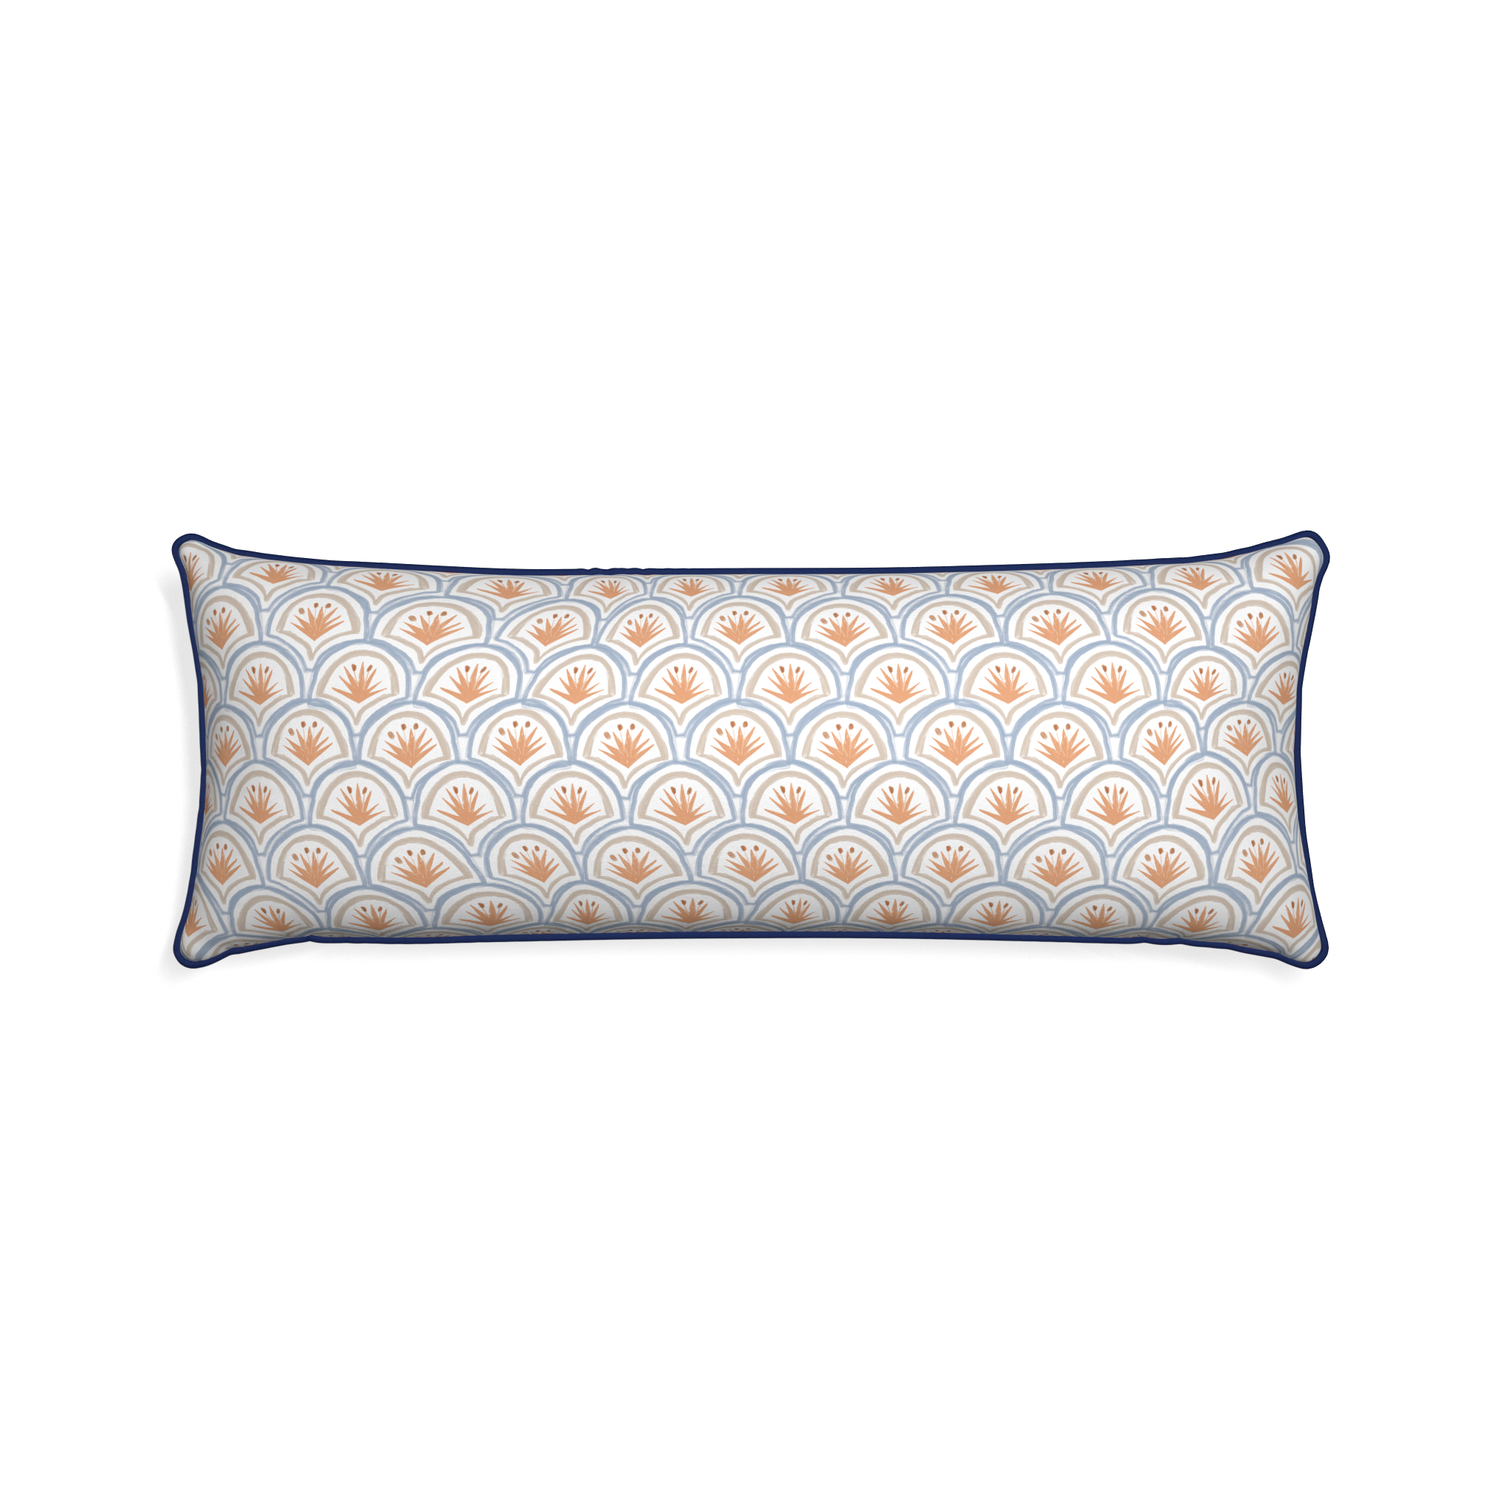 Xl-lumbar thatcher apricot custom pillow with midnight piping on white background